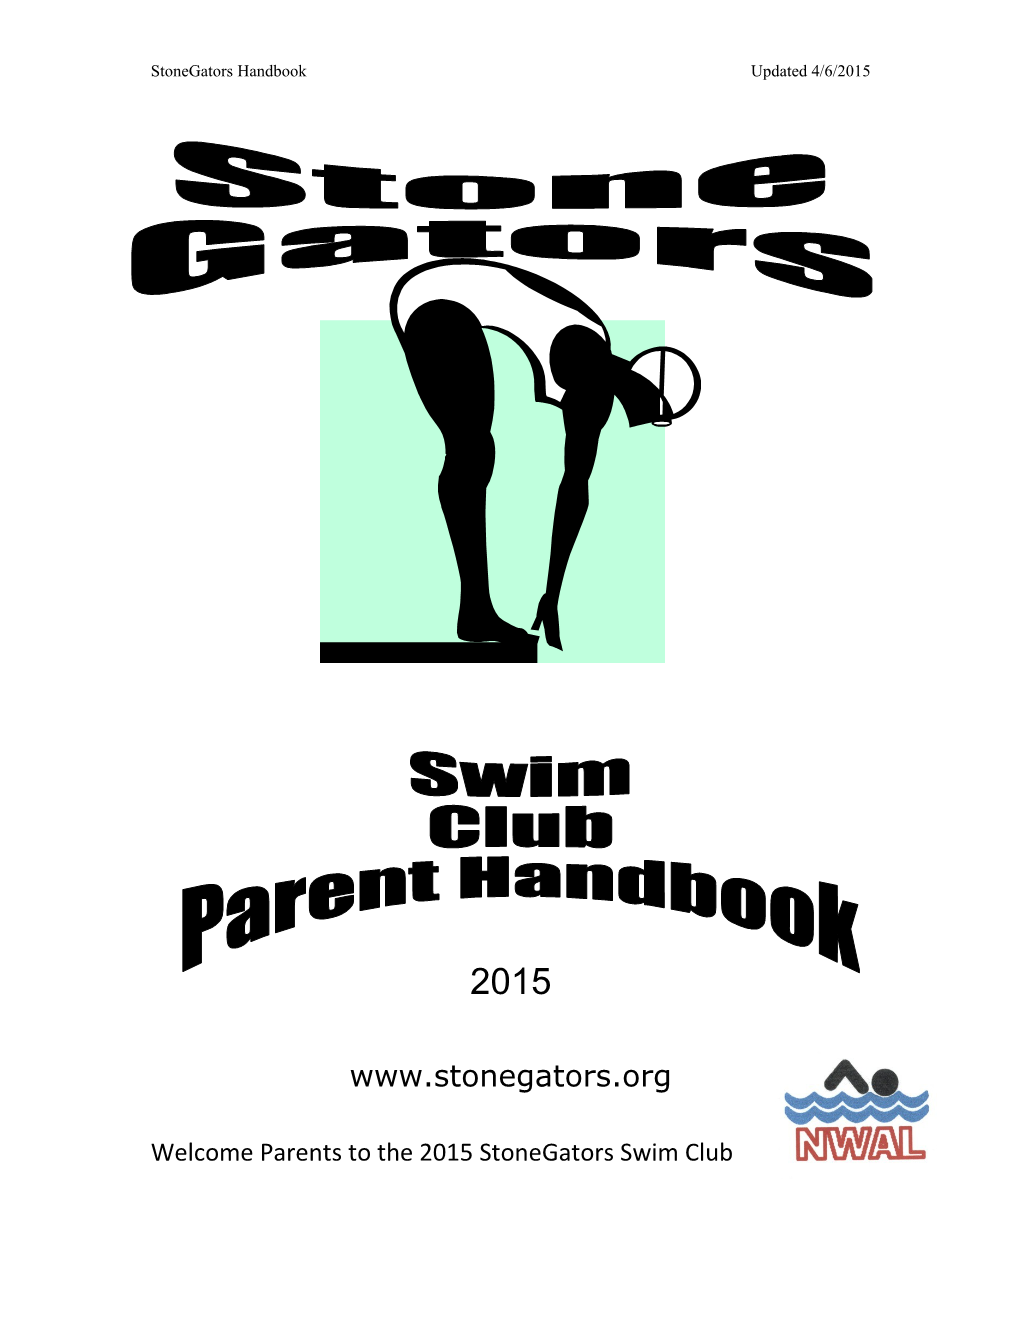 Welcome Parents to the 2015 Stonegators Swim Club